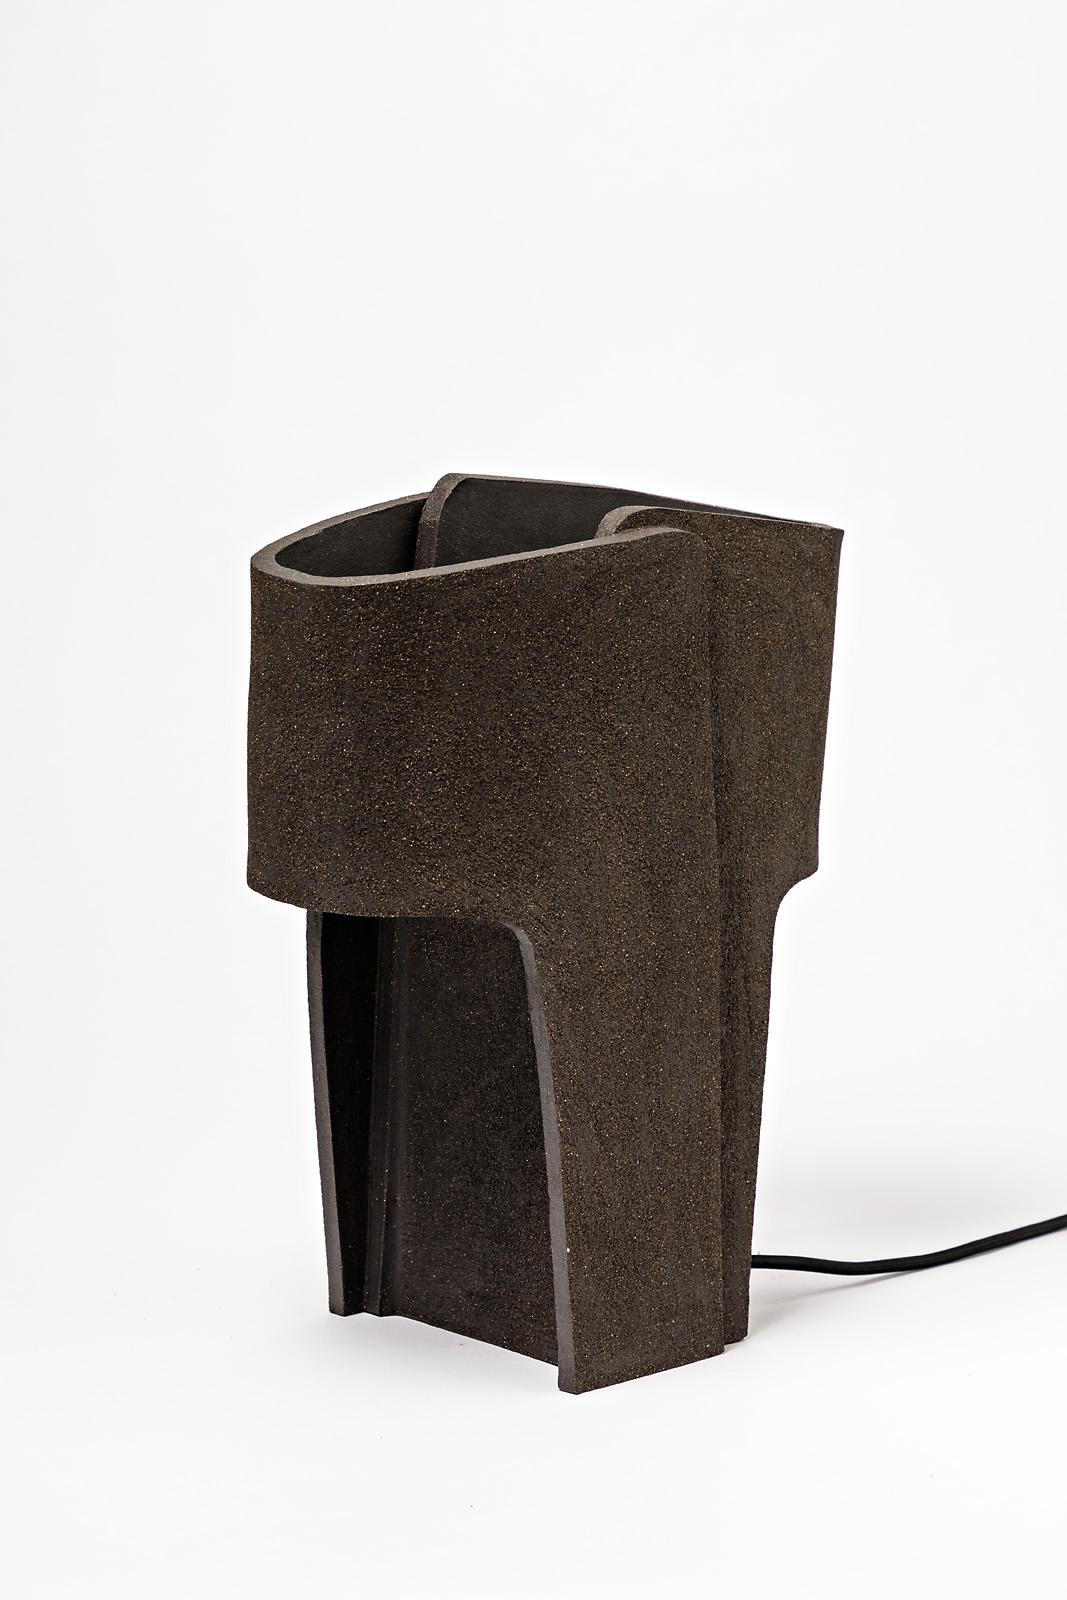 Contemporary Ceramic Table Lamp by Denis Castaing, 2020 For Sale